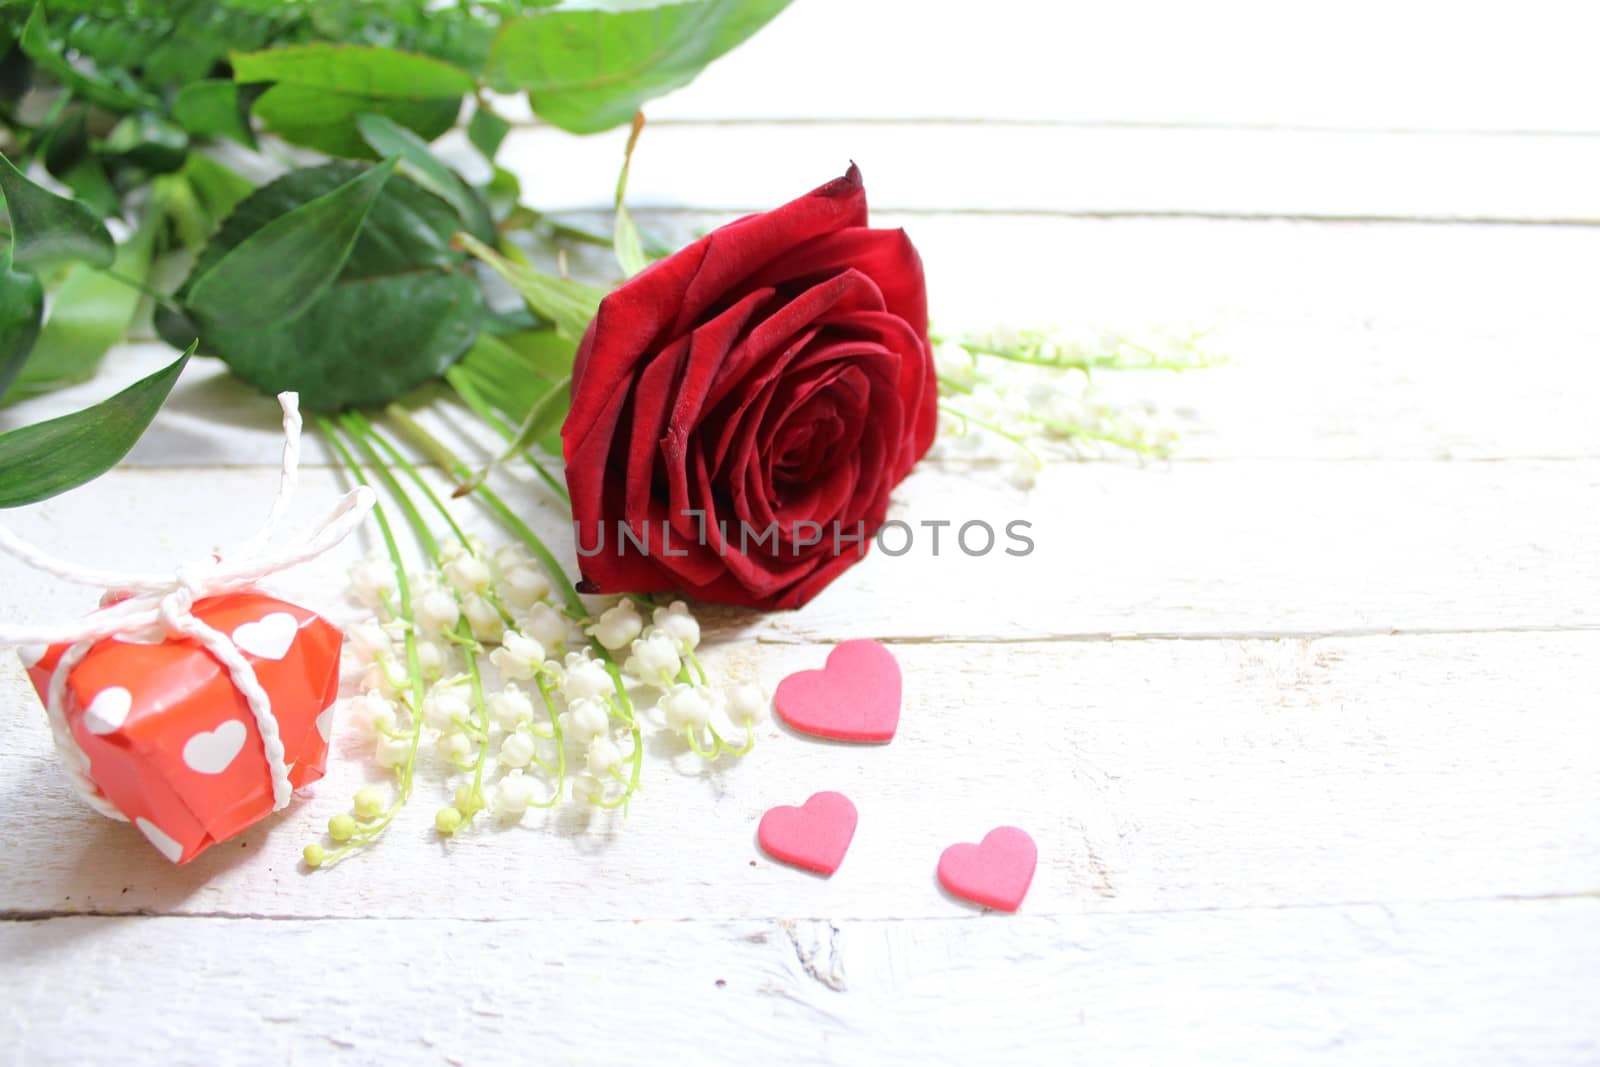 flower greetings with hearts and a gift by martina_unbehauen